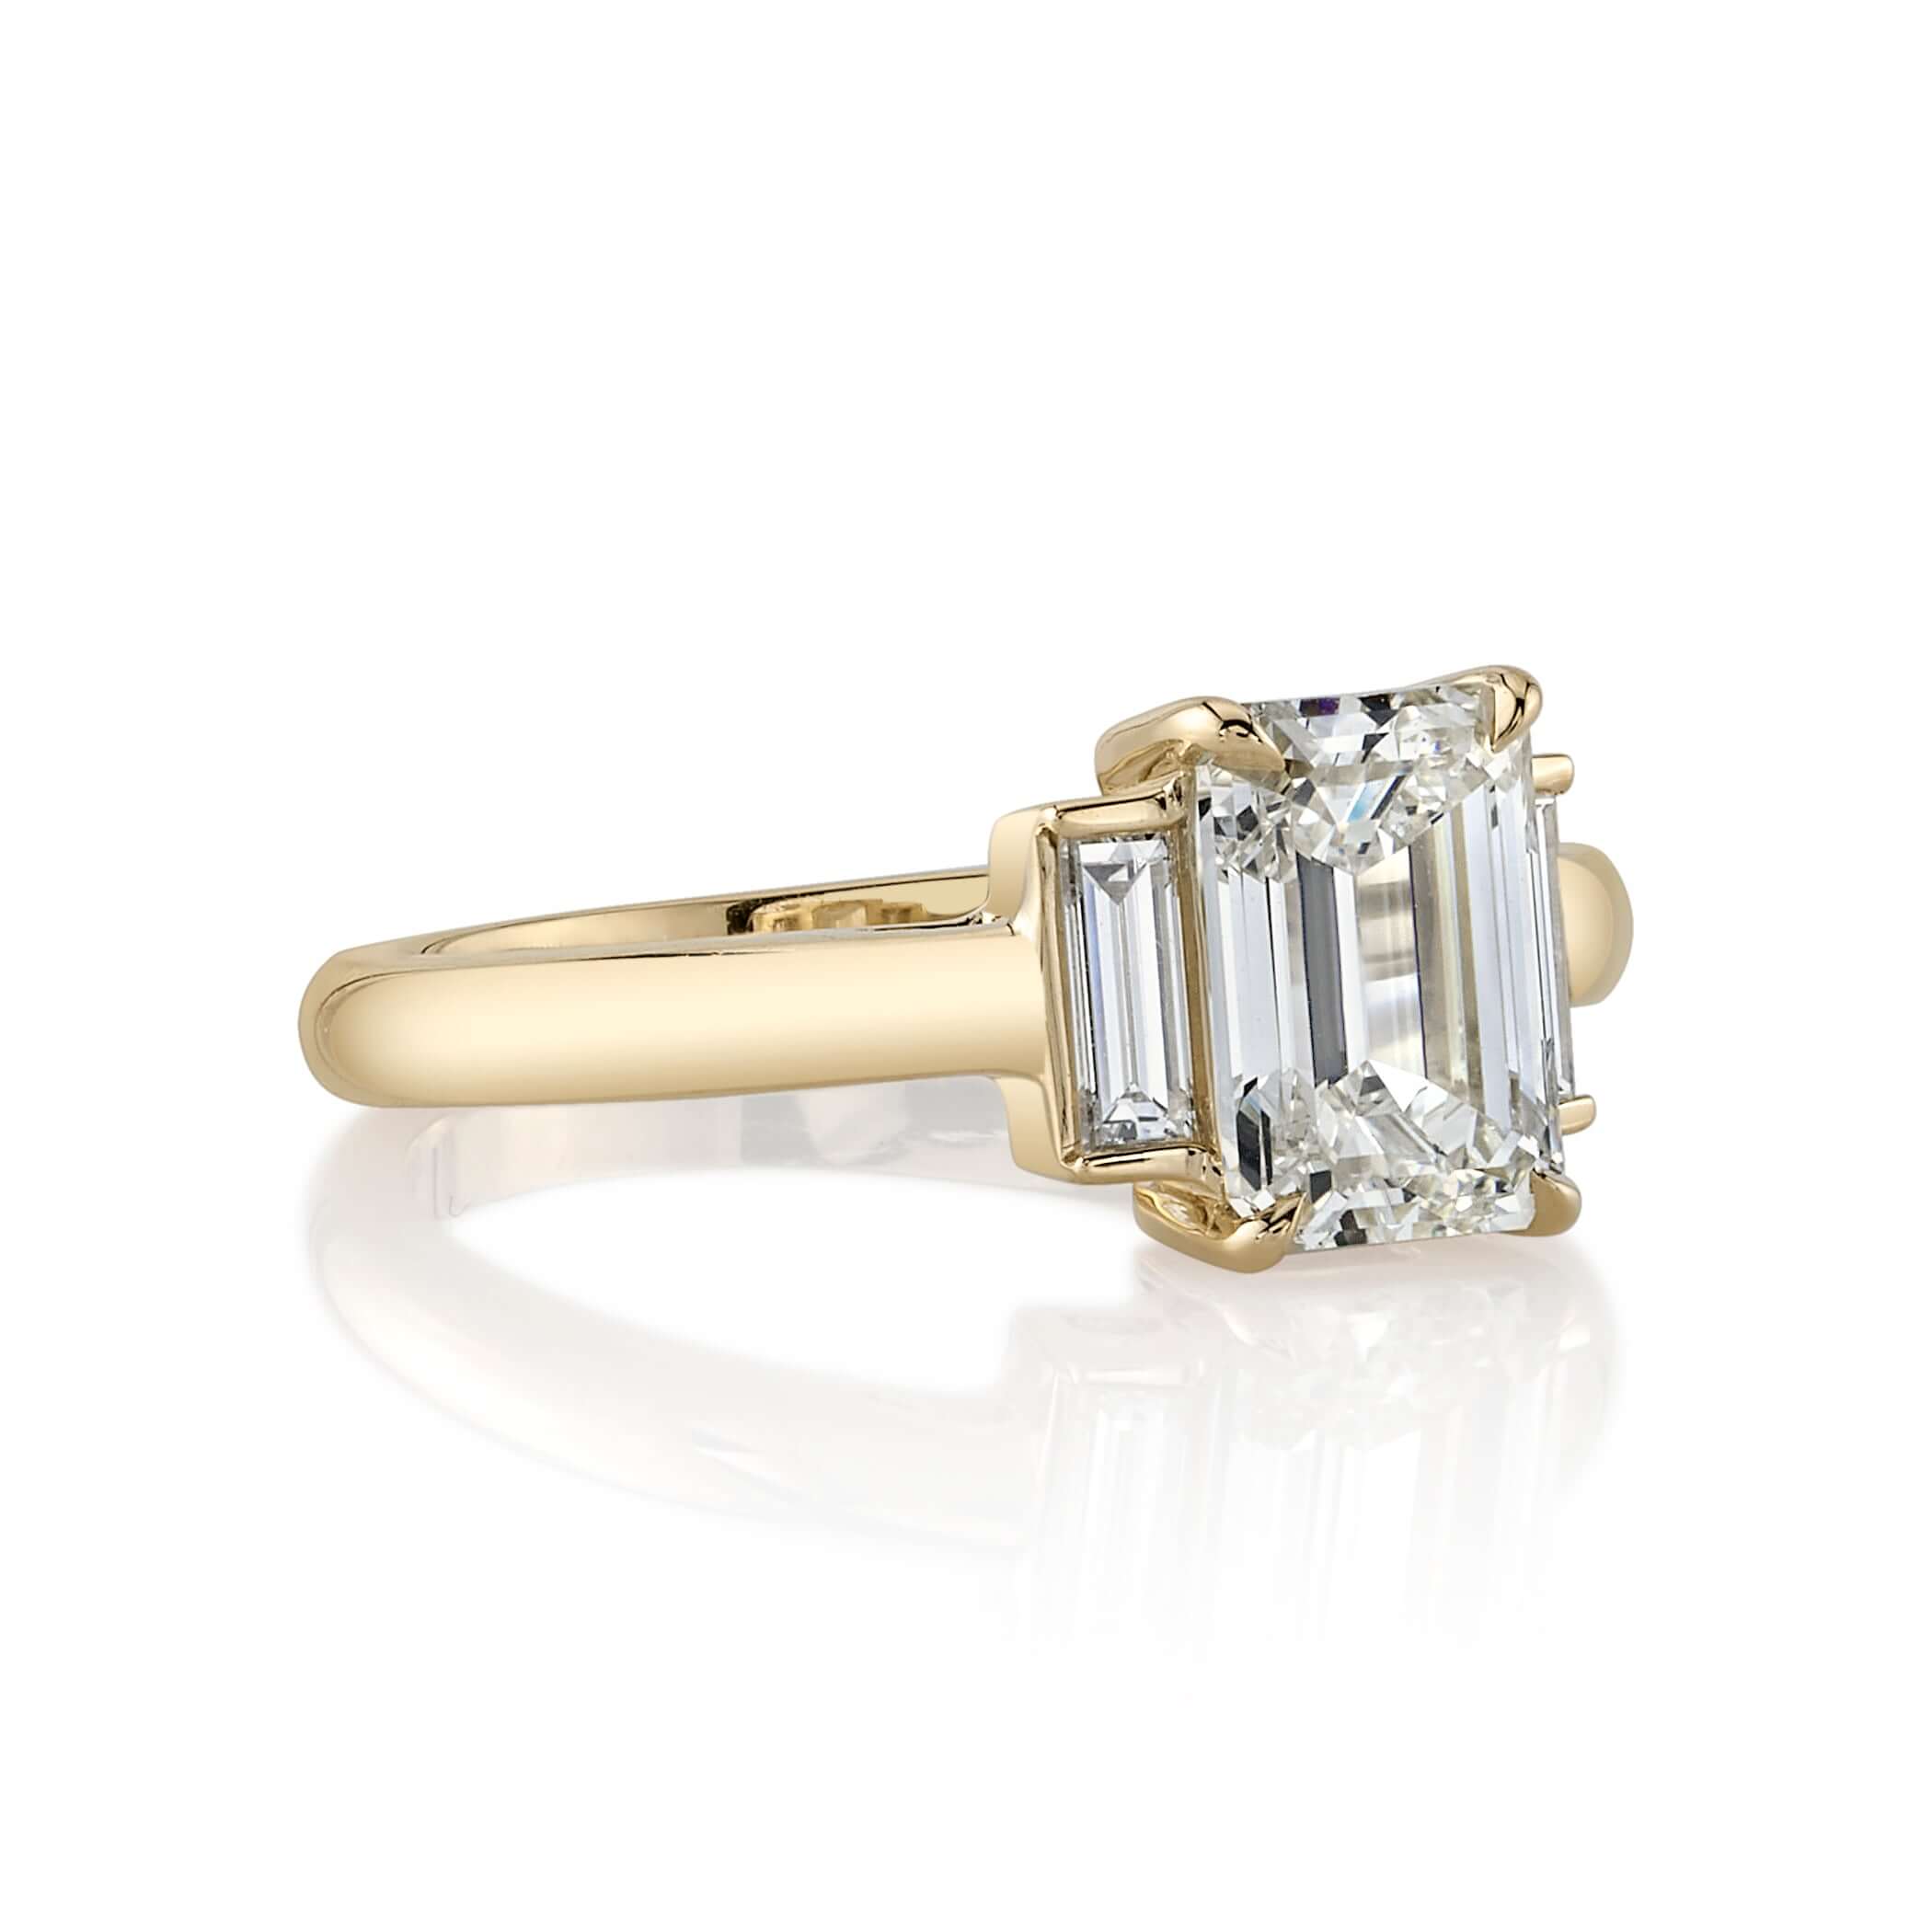 SINGLE STONE LONDON RING featuring 1.72ct M/VVS1 GIA certified emerald cut diamond with 0.25ctw baguette cut accent diamonds set in a handcrafted 18K yellow gold mounting.